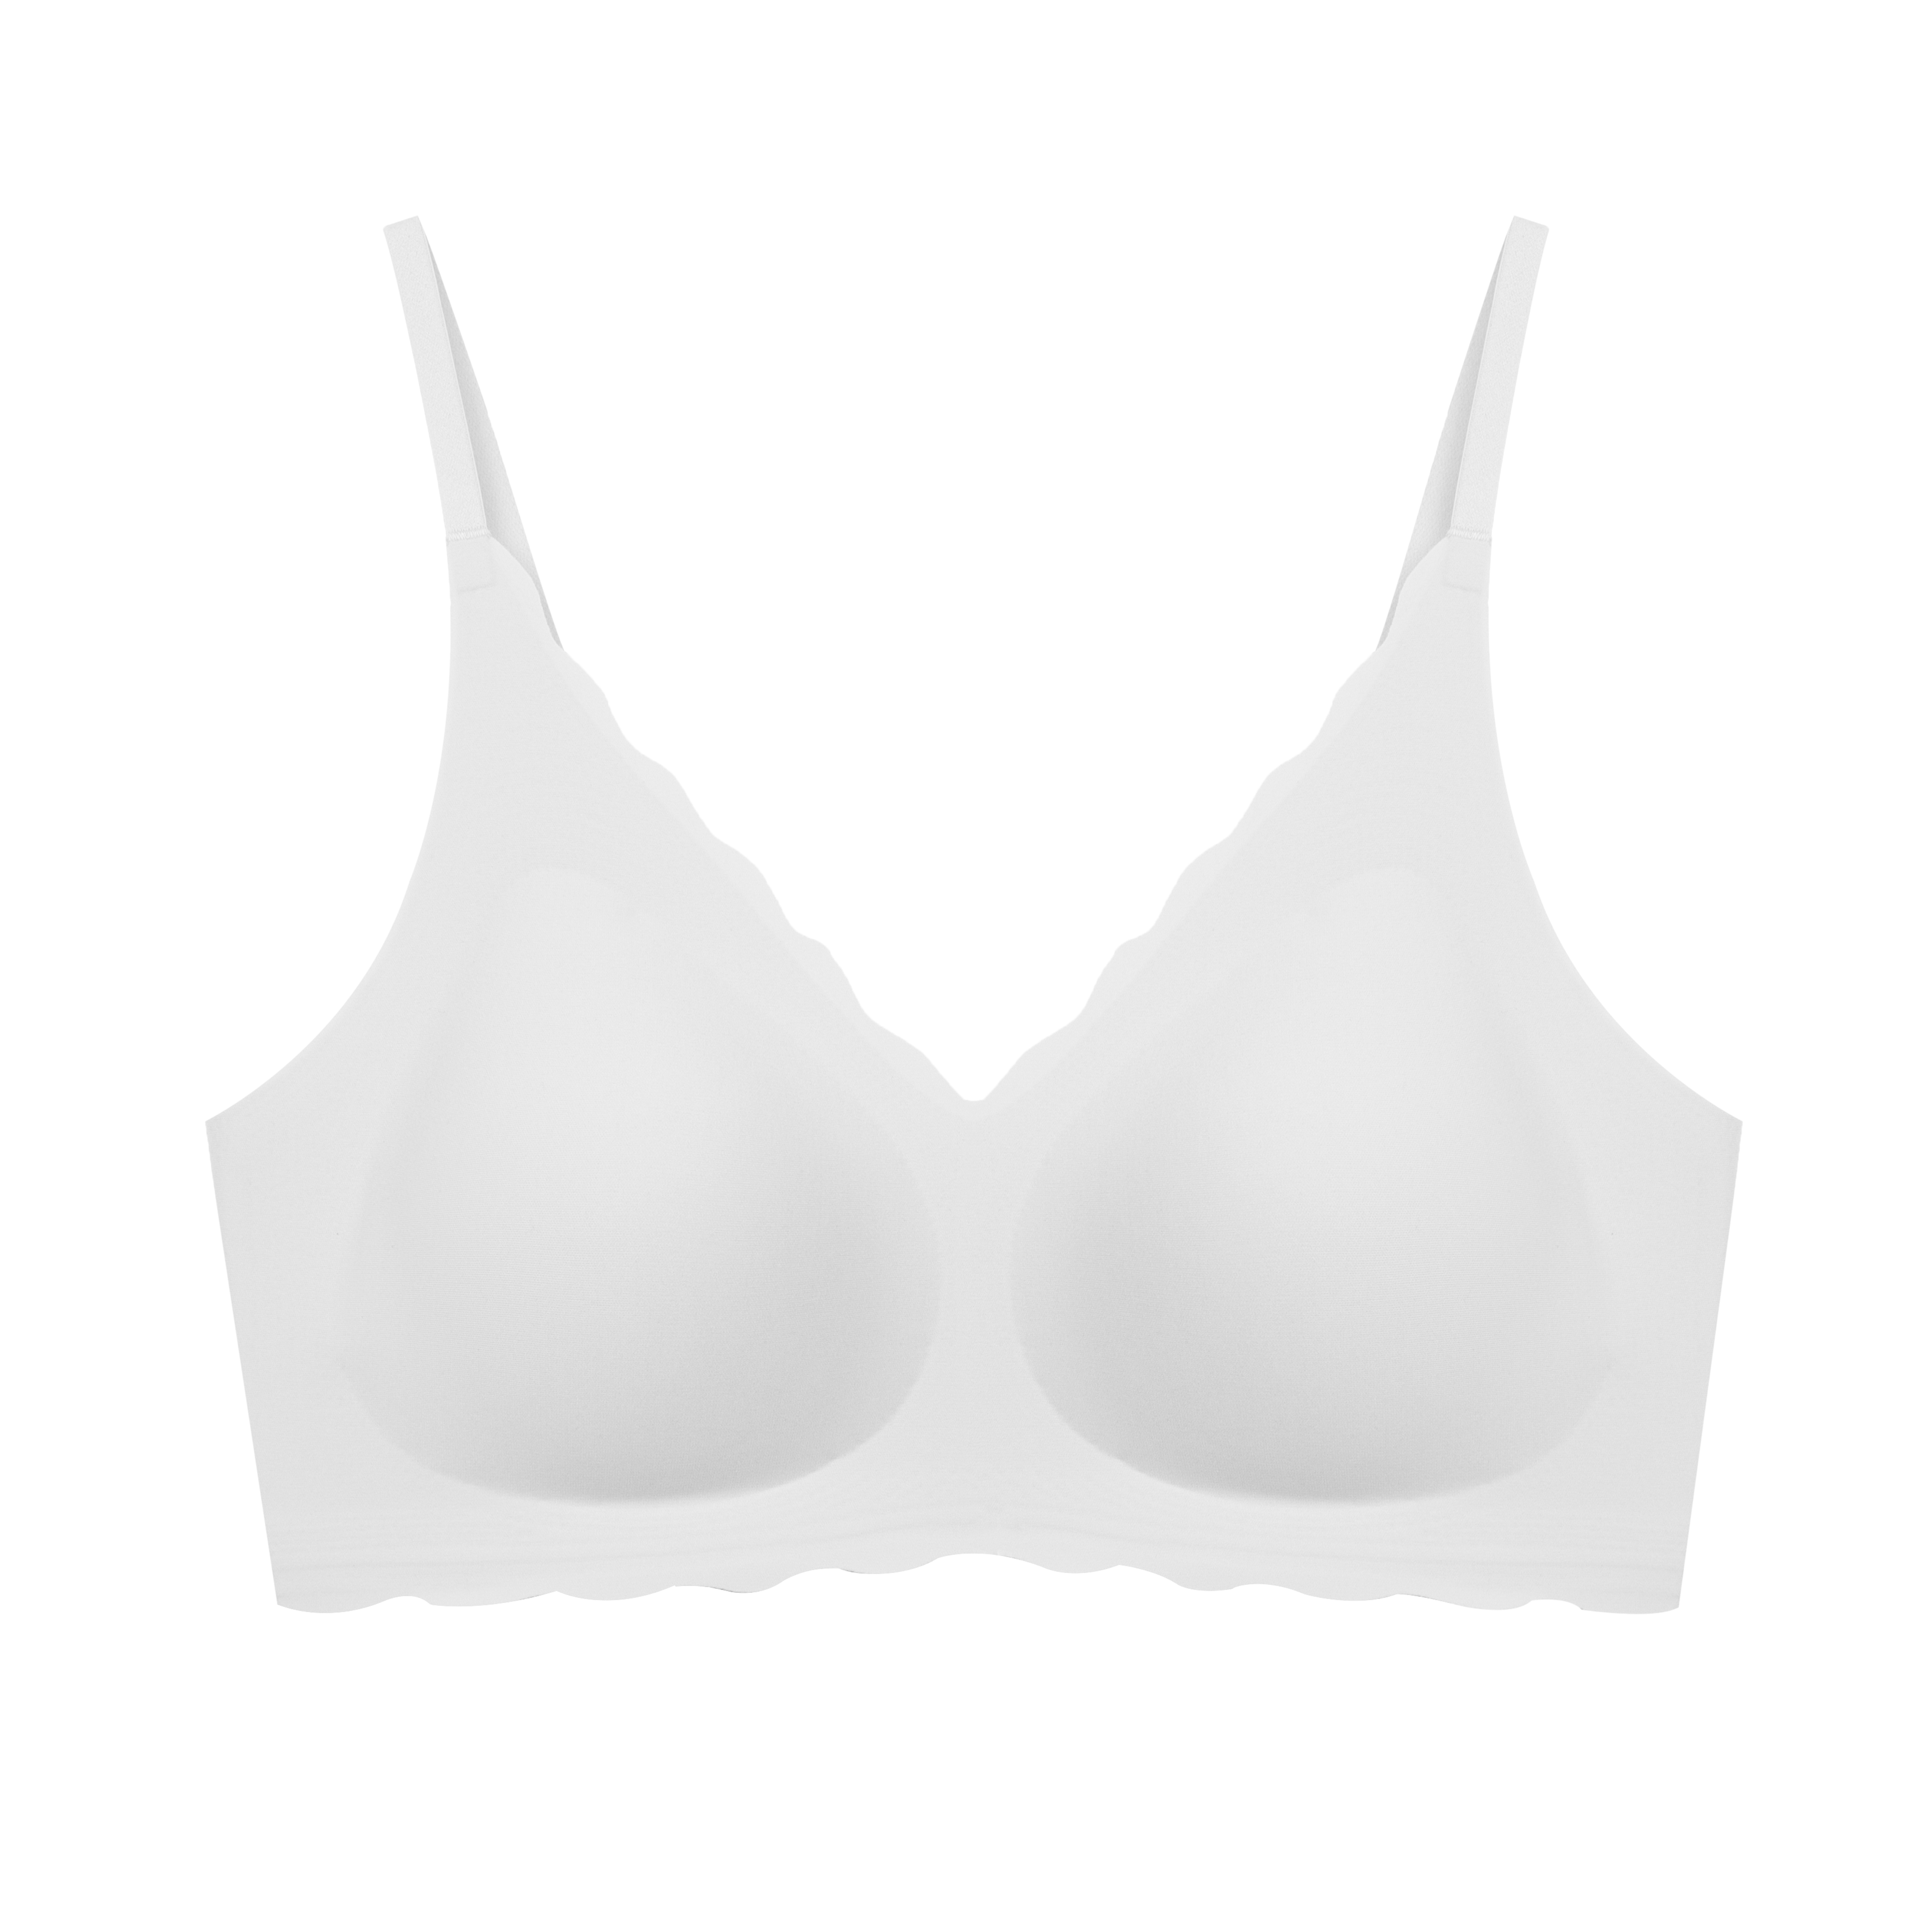 Get ubras Women's Wireless For Work&Life Wavy-Edge Hook Bra Peach One size  1 each Delivered